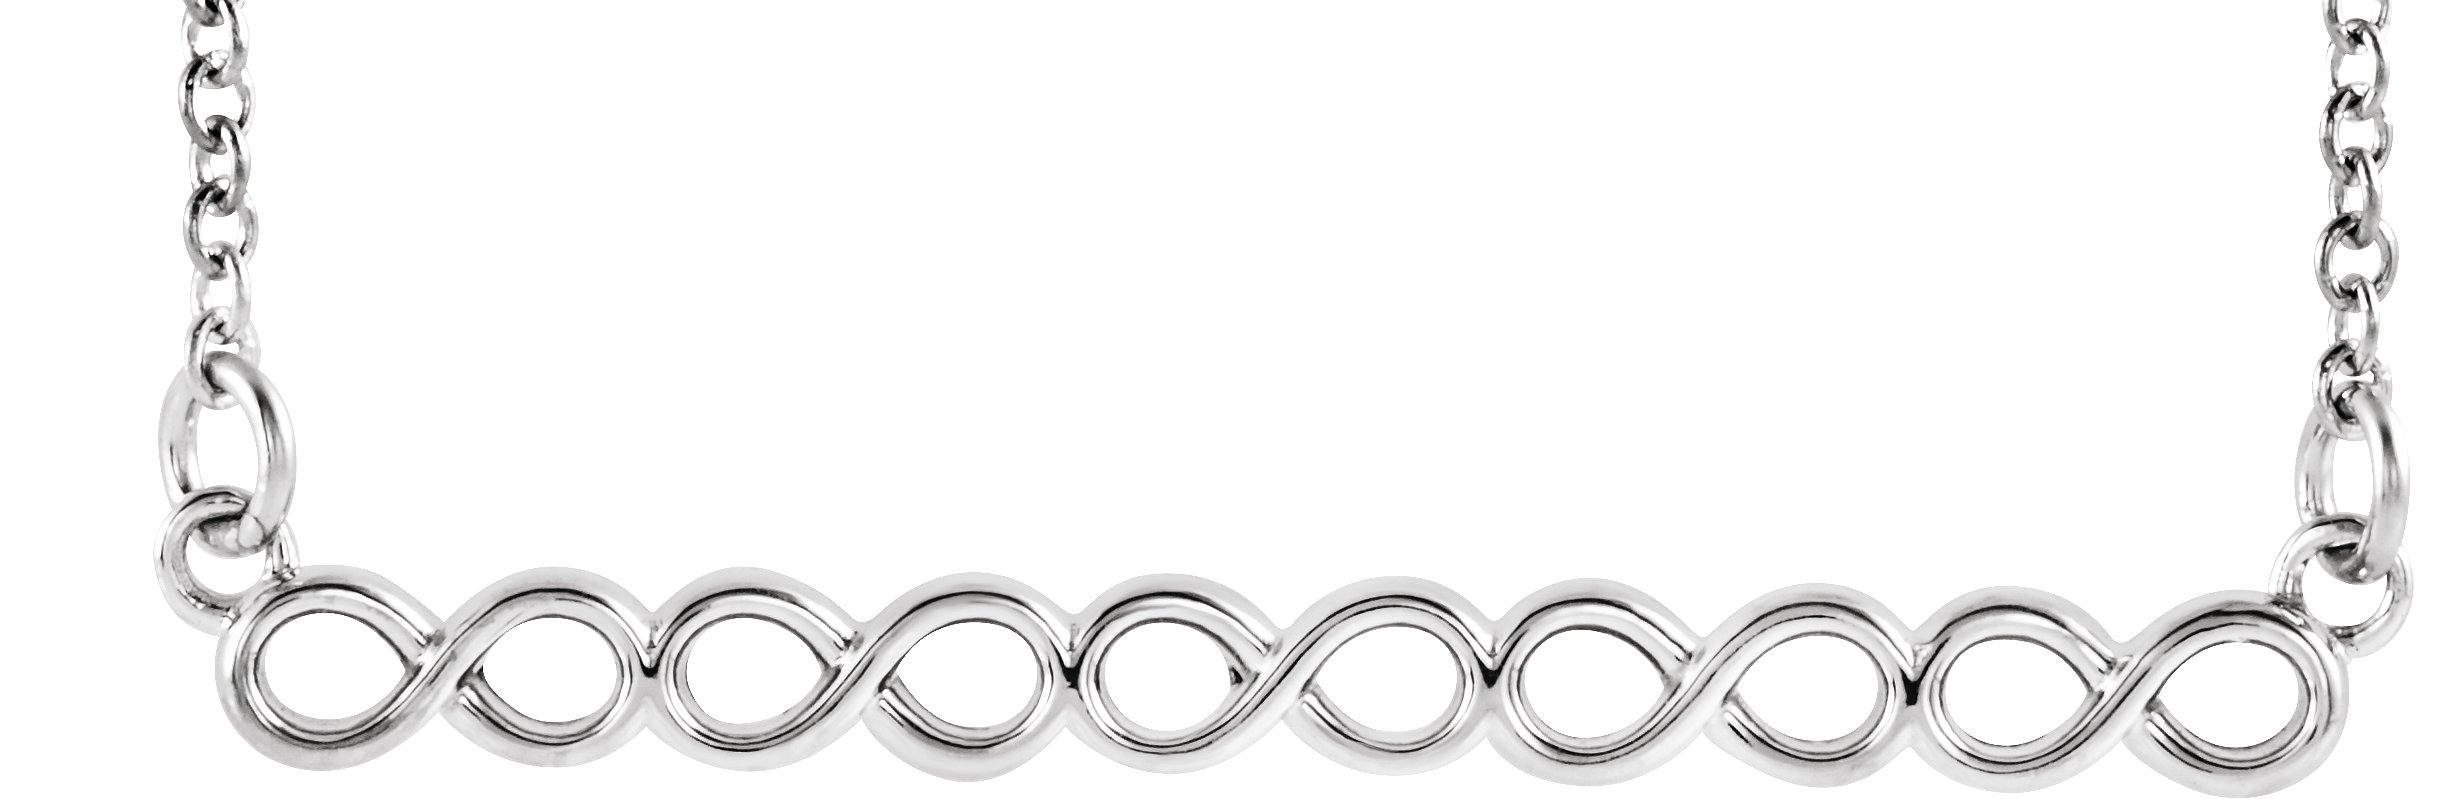 Sterling Silver Infinity Inspired 16 18 inch Bar Necklace Ref. 13666725